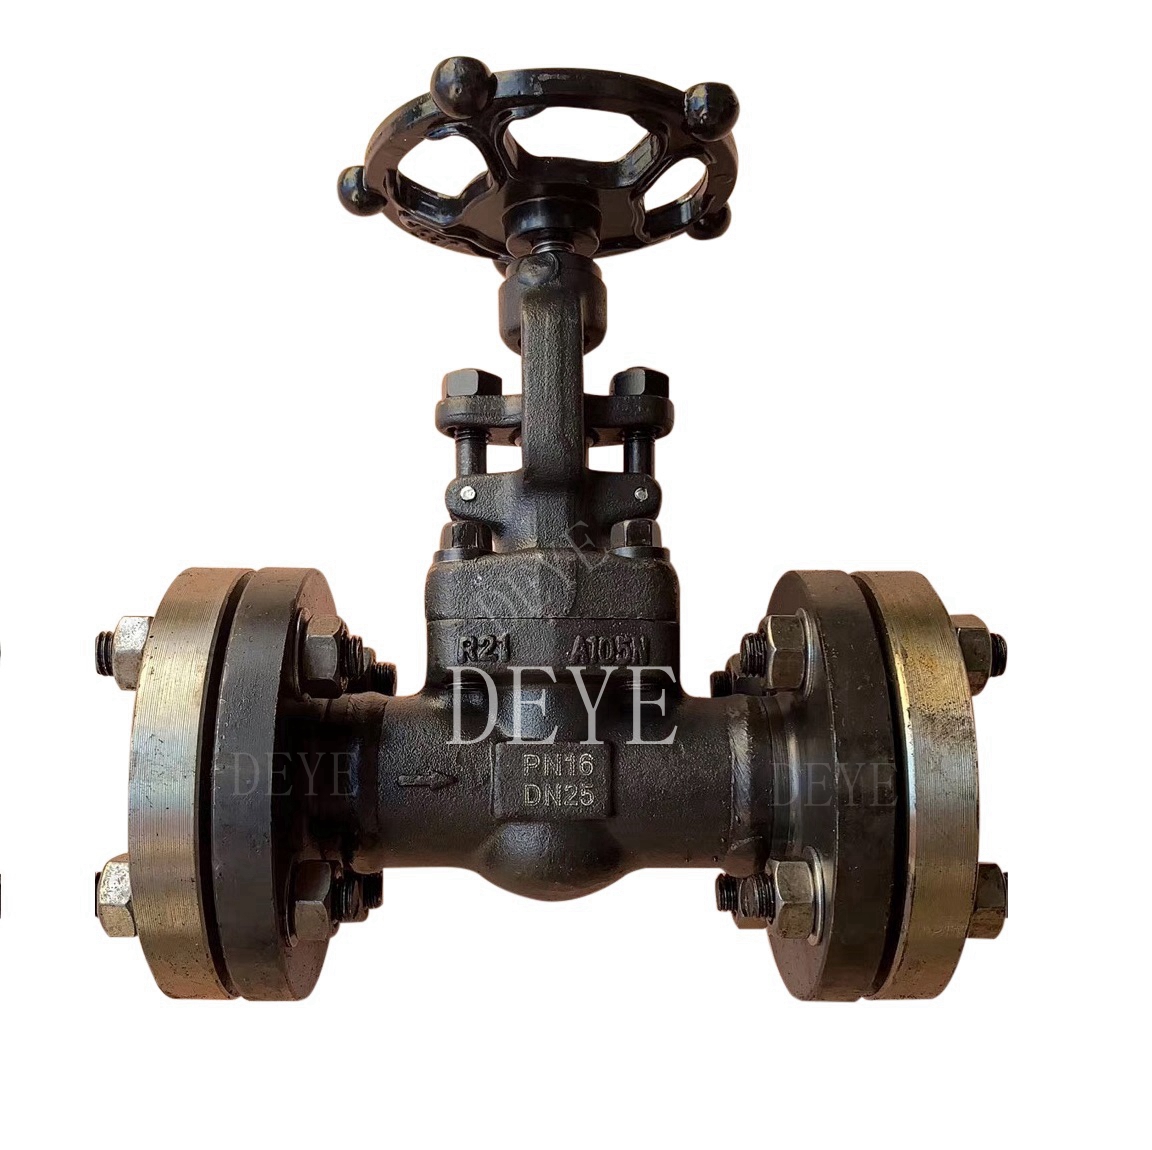 New Delivery for Lc3 Cryogenic Valve -
 A105 Forged steel Gate Valve with counter flanges GVC-0016-1F – Deye